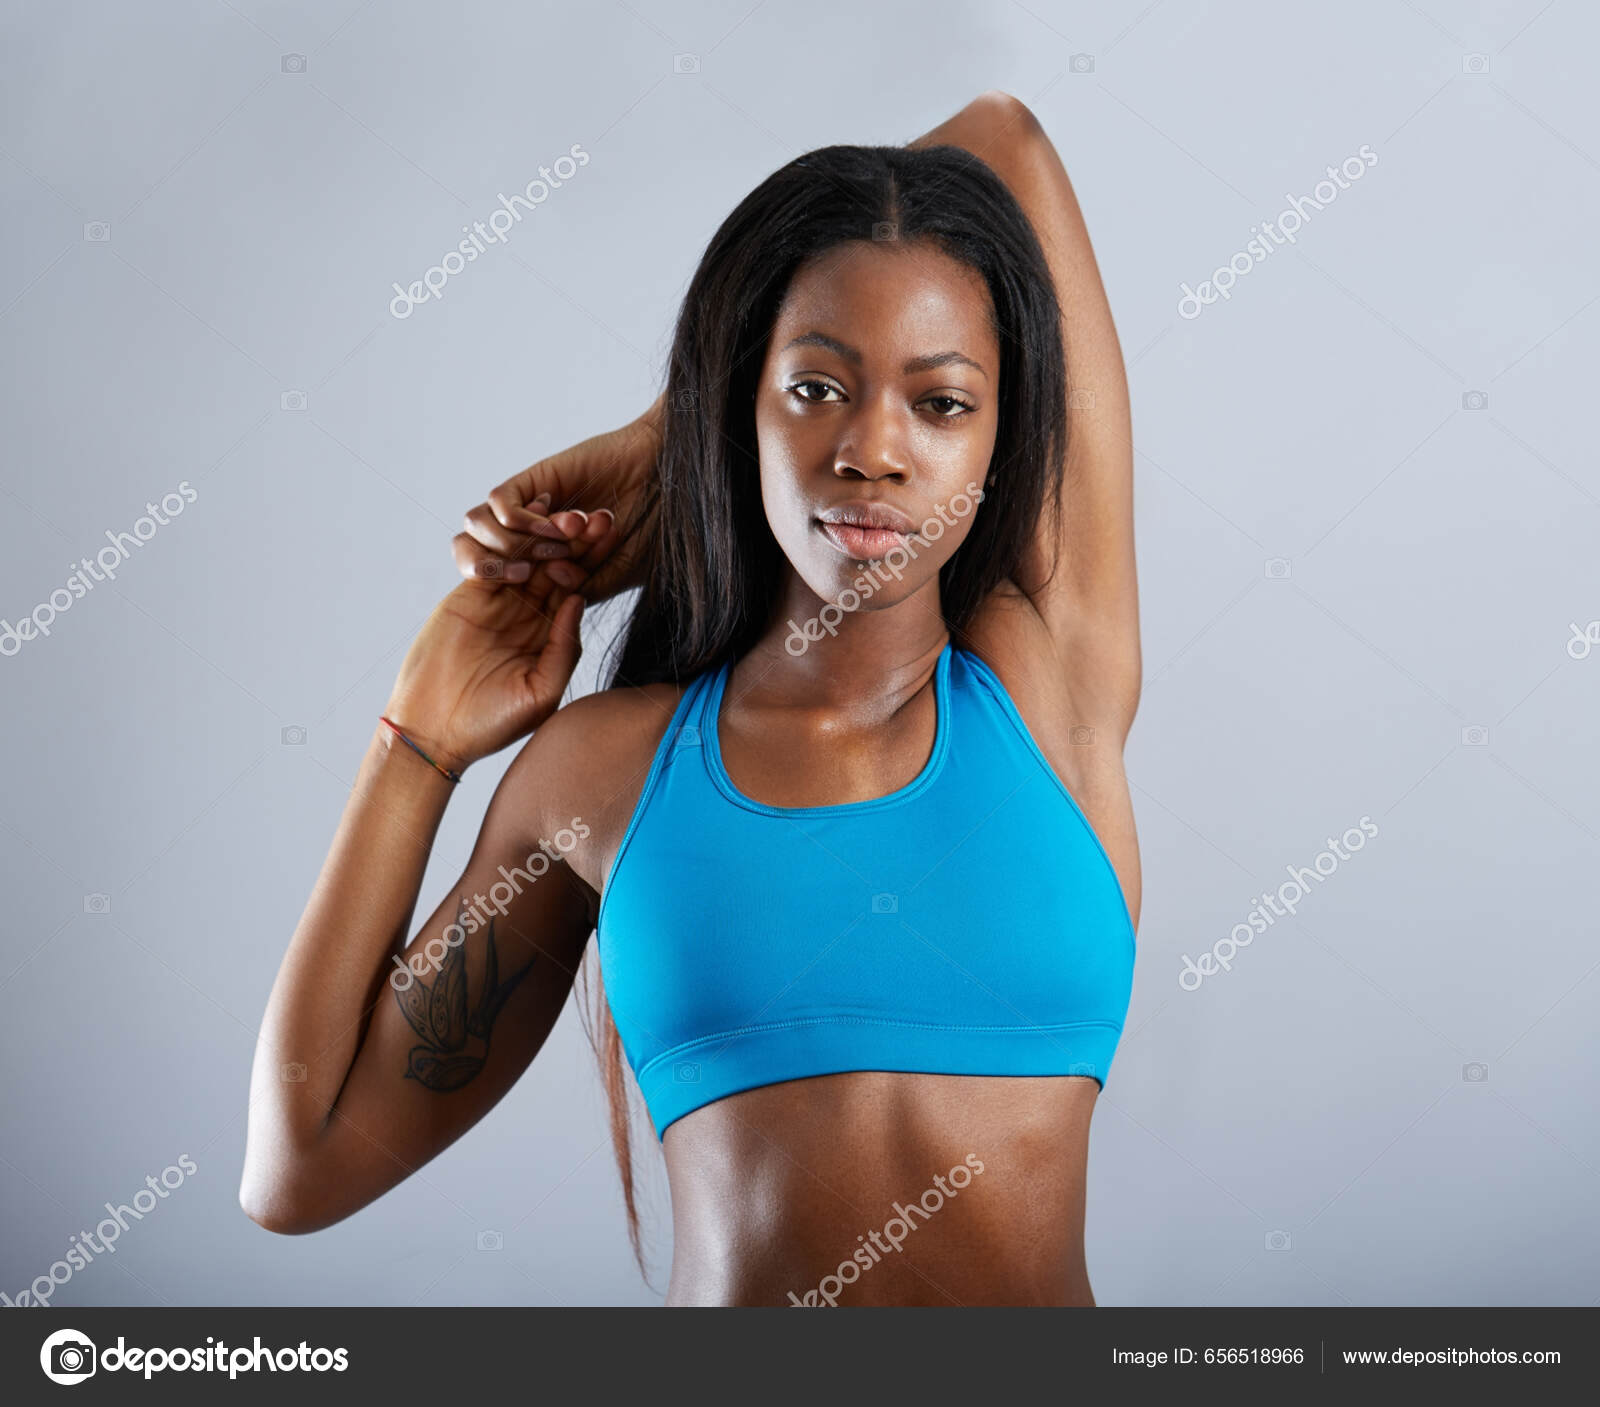 Black Woman Studio Portrait Stretching Arms Fitness Exercise